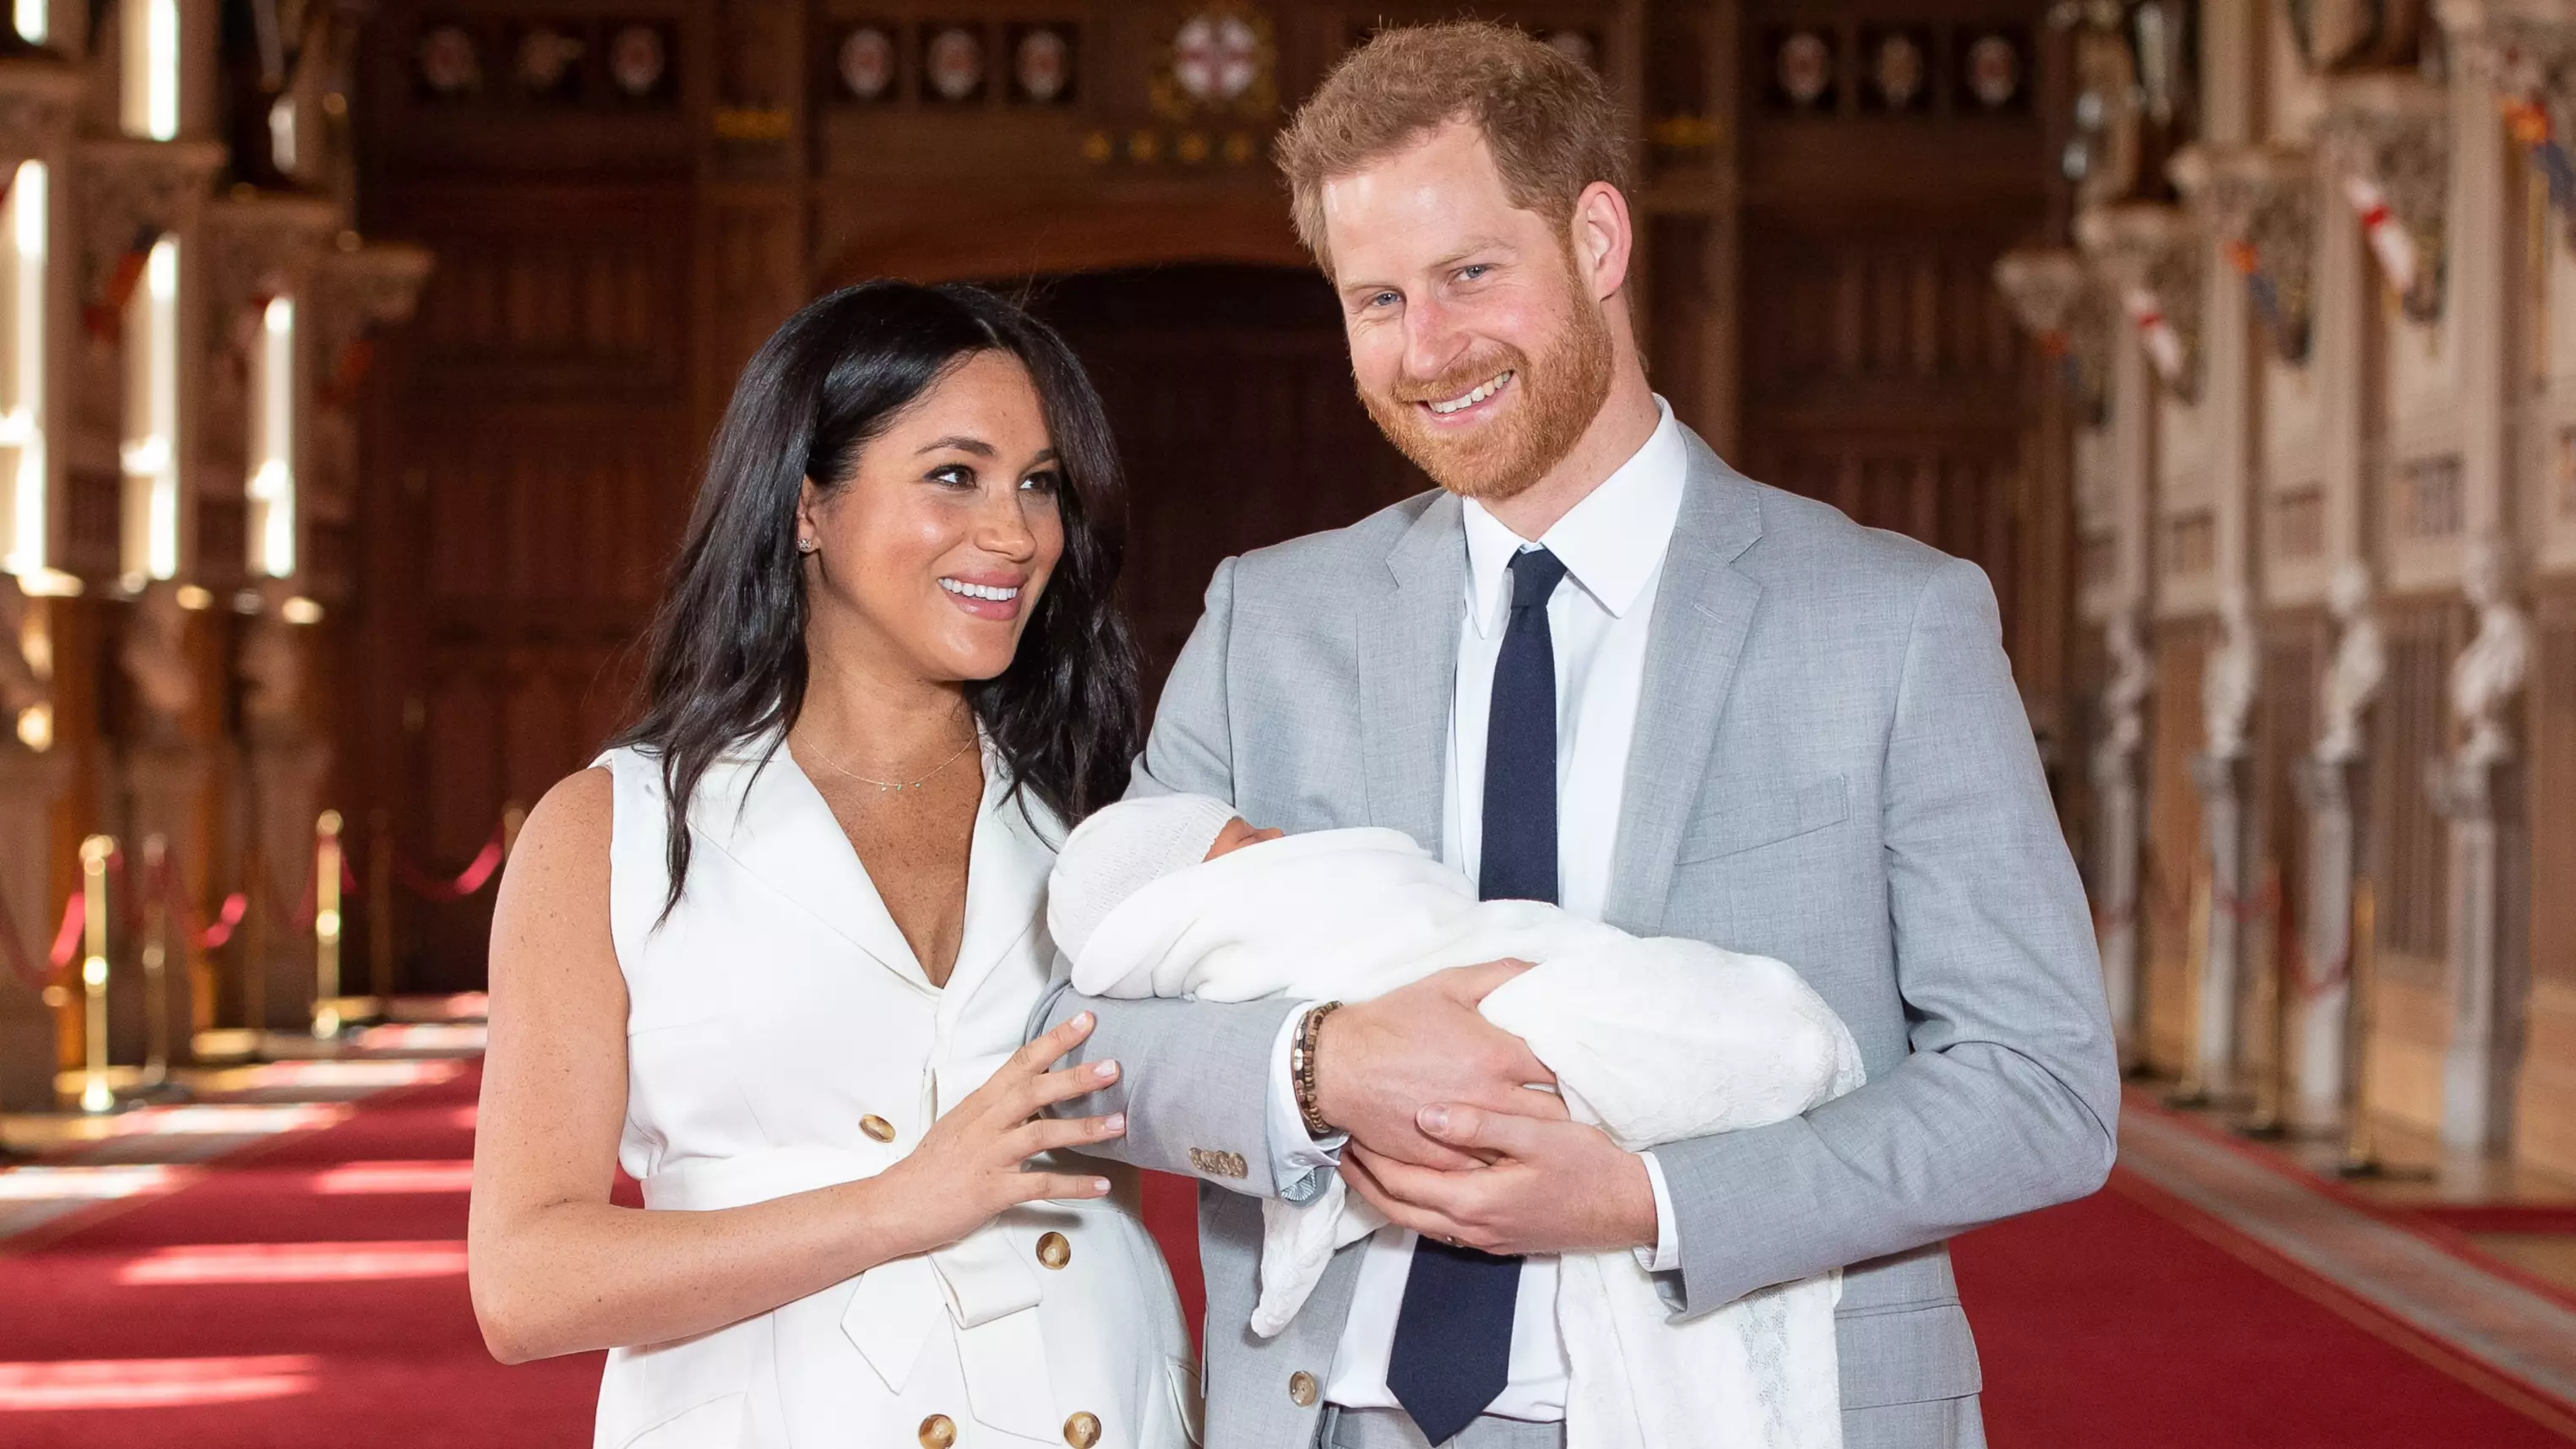 Meghan Markle And Prince Harry Reportedly Opted For £1,120 Pram For Baby Archie